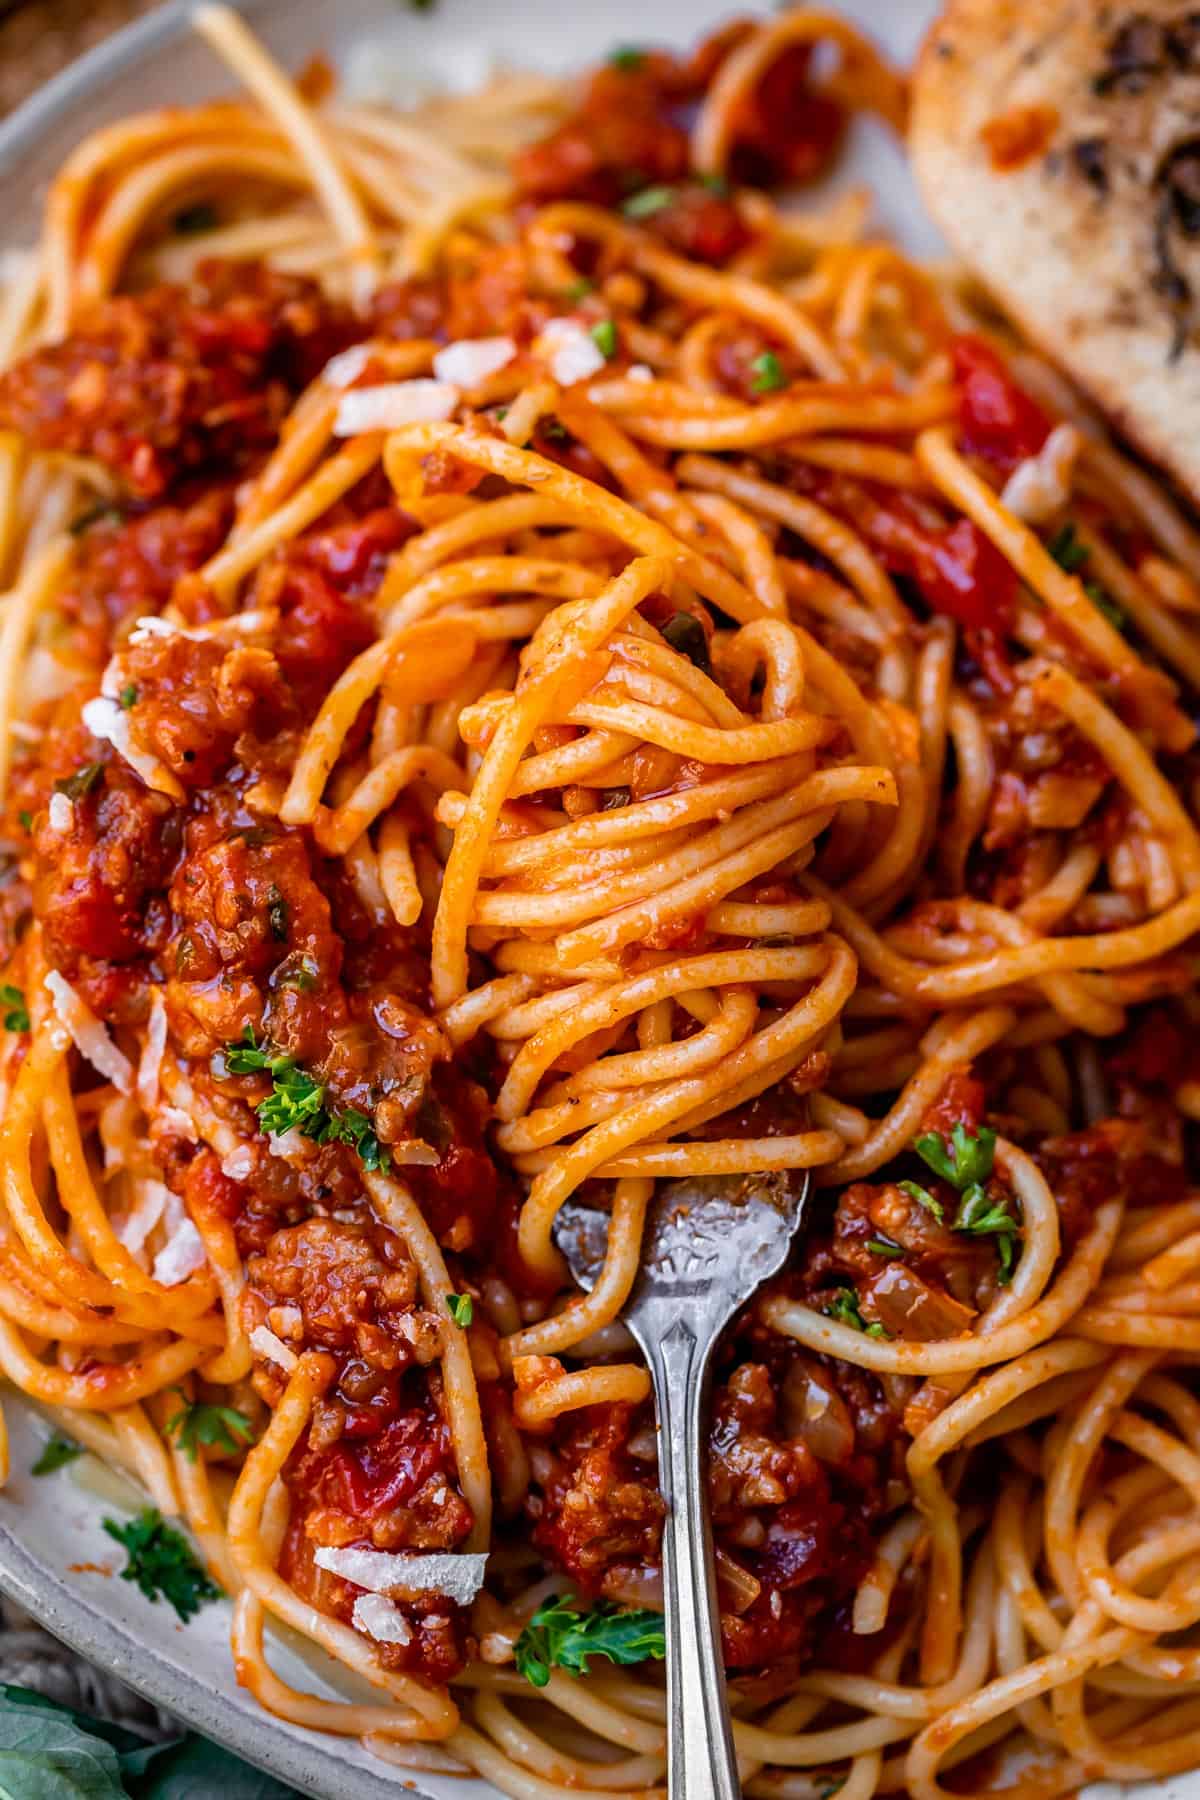 spaghetti noodles covered in spaghetti sauce recipe wrapped around a fork, sitting on plate of spaghetti.